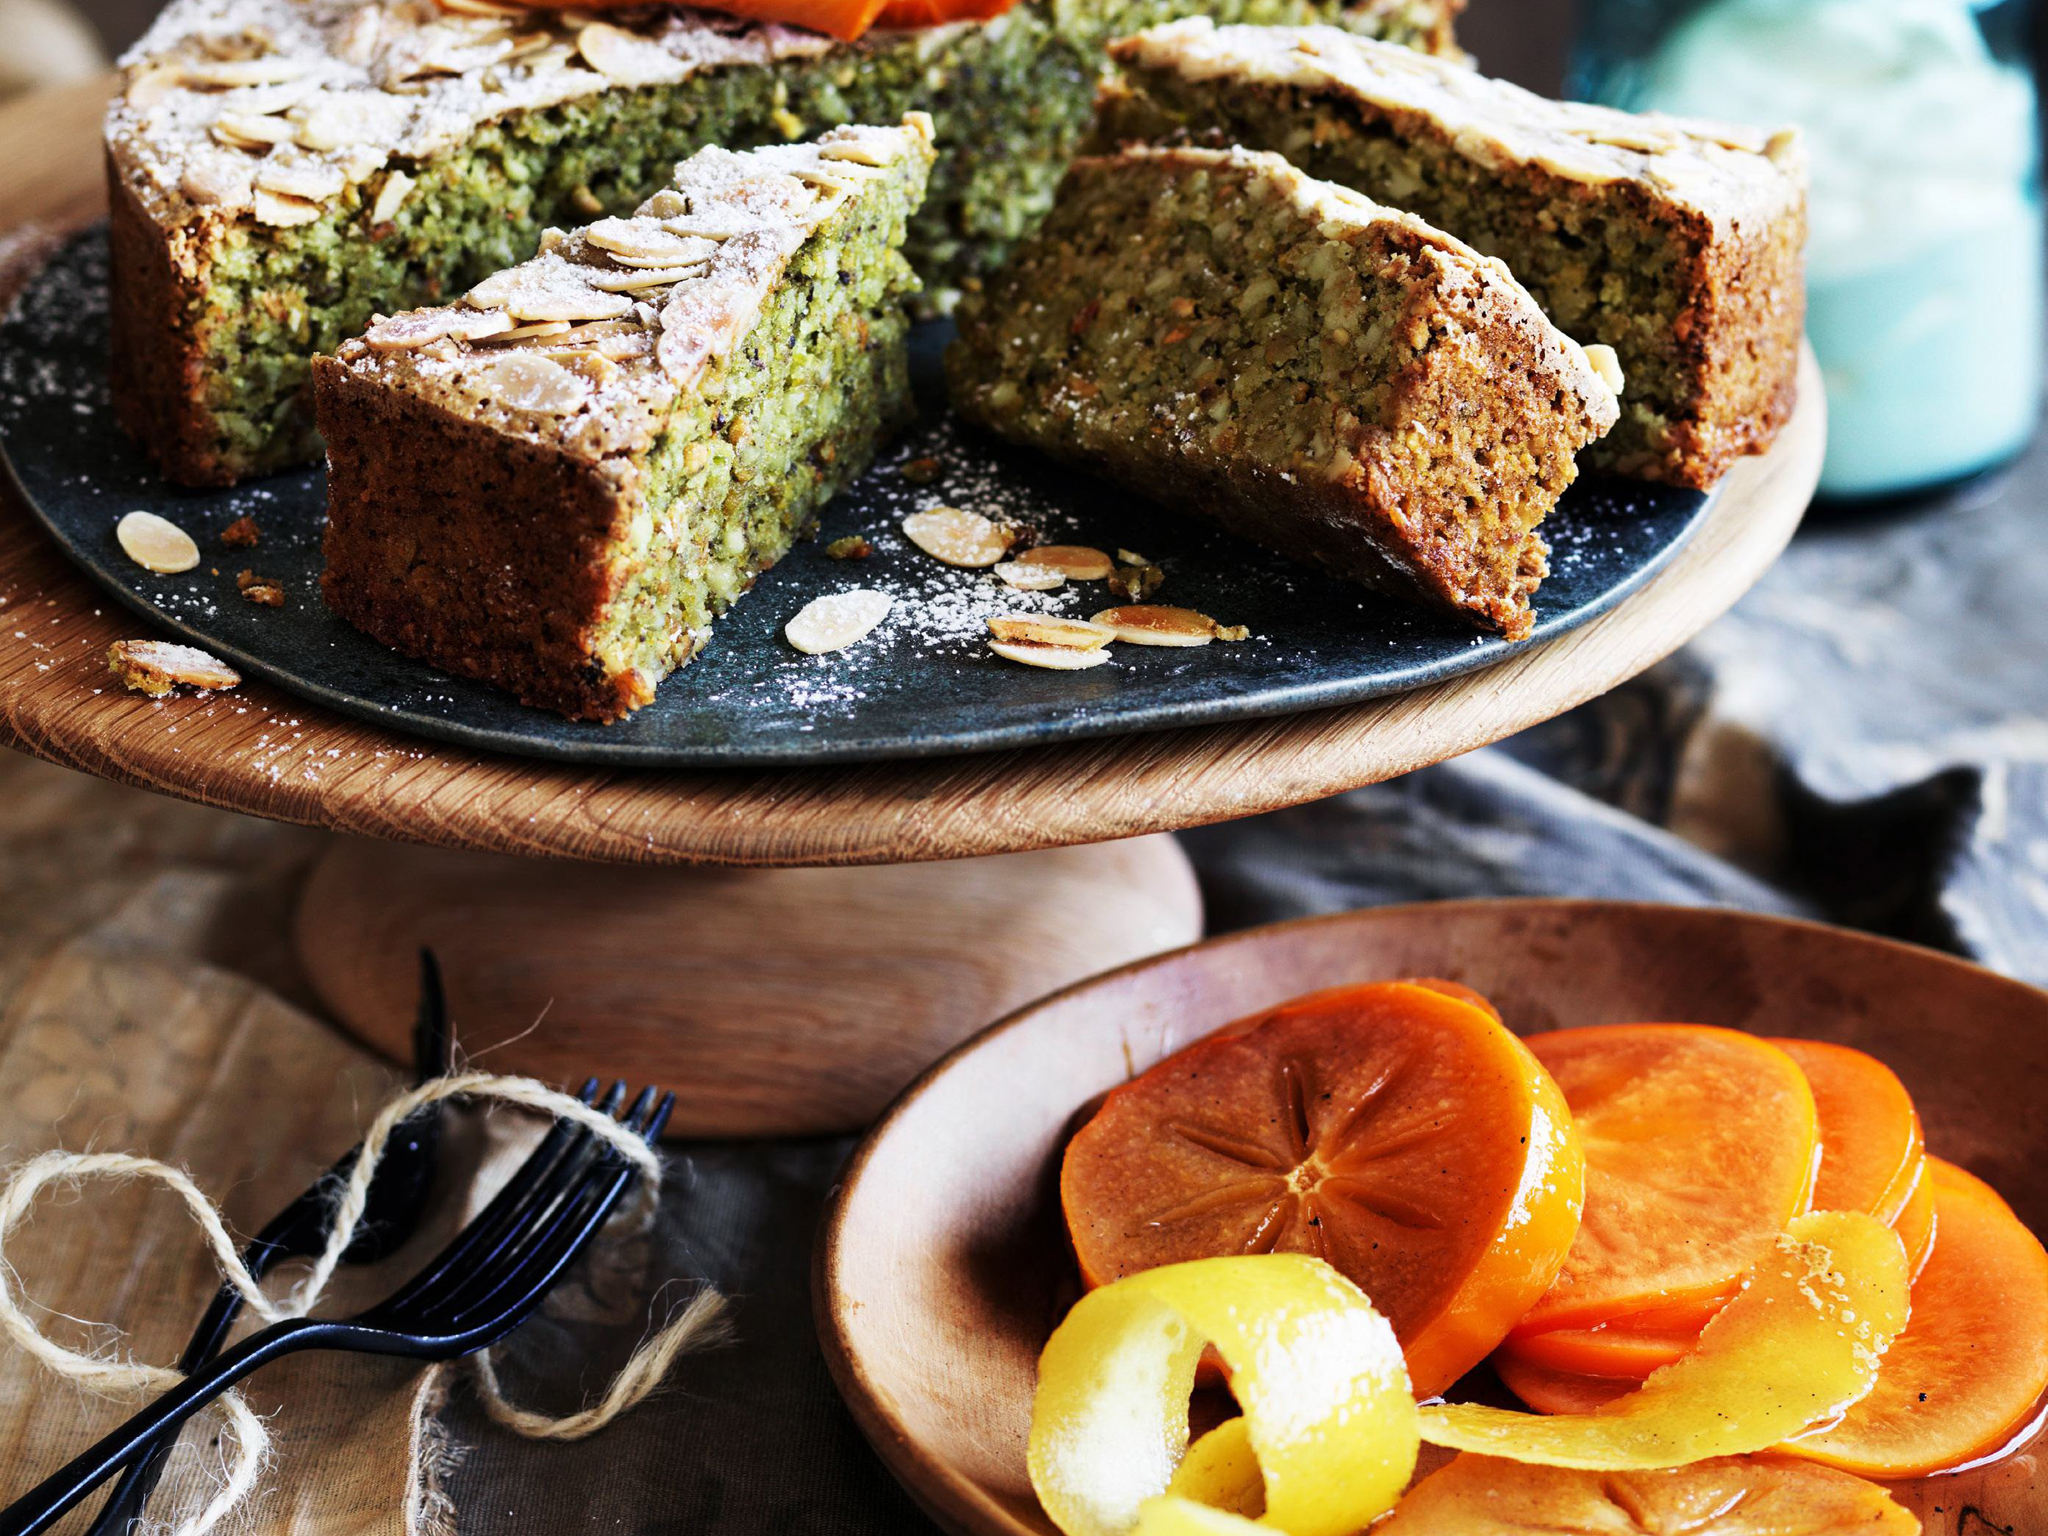 Pistachio ALMOND CAKE WITH poachedpersimmons